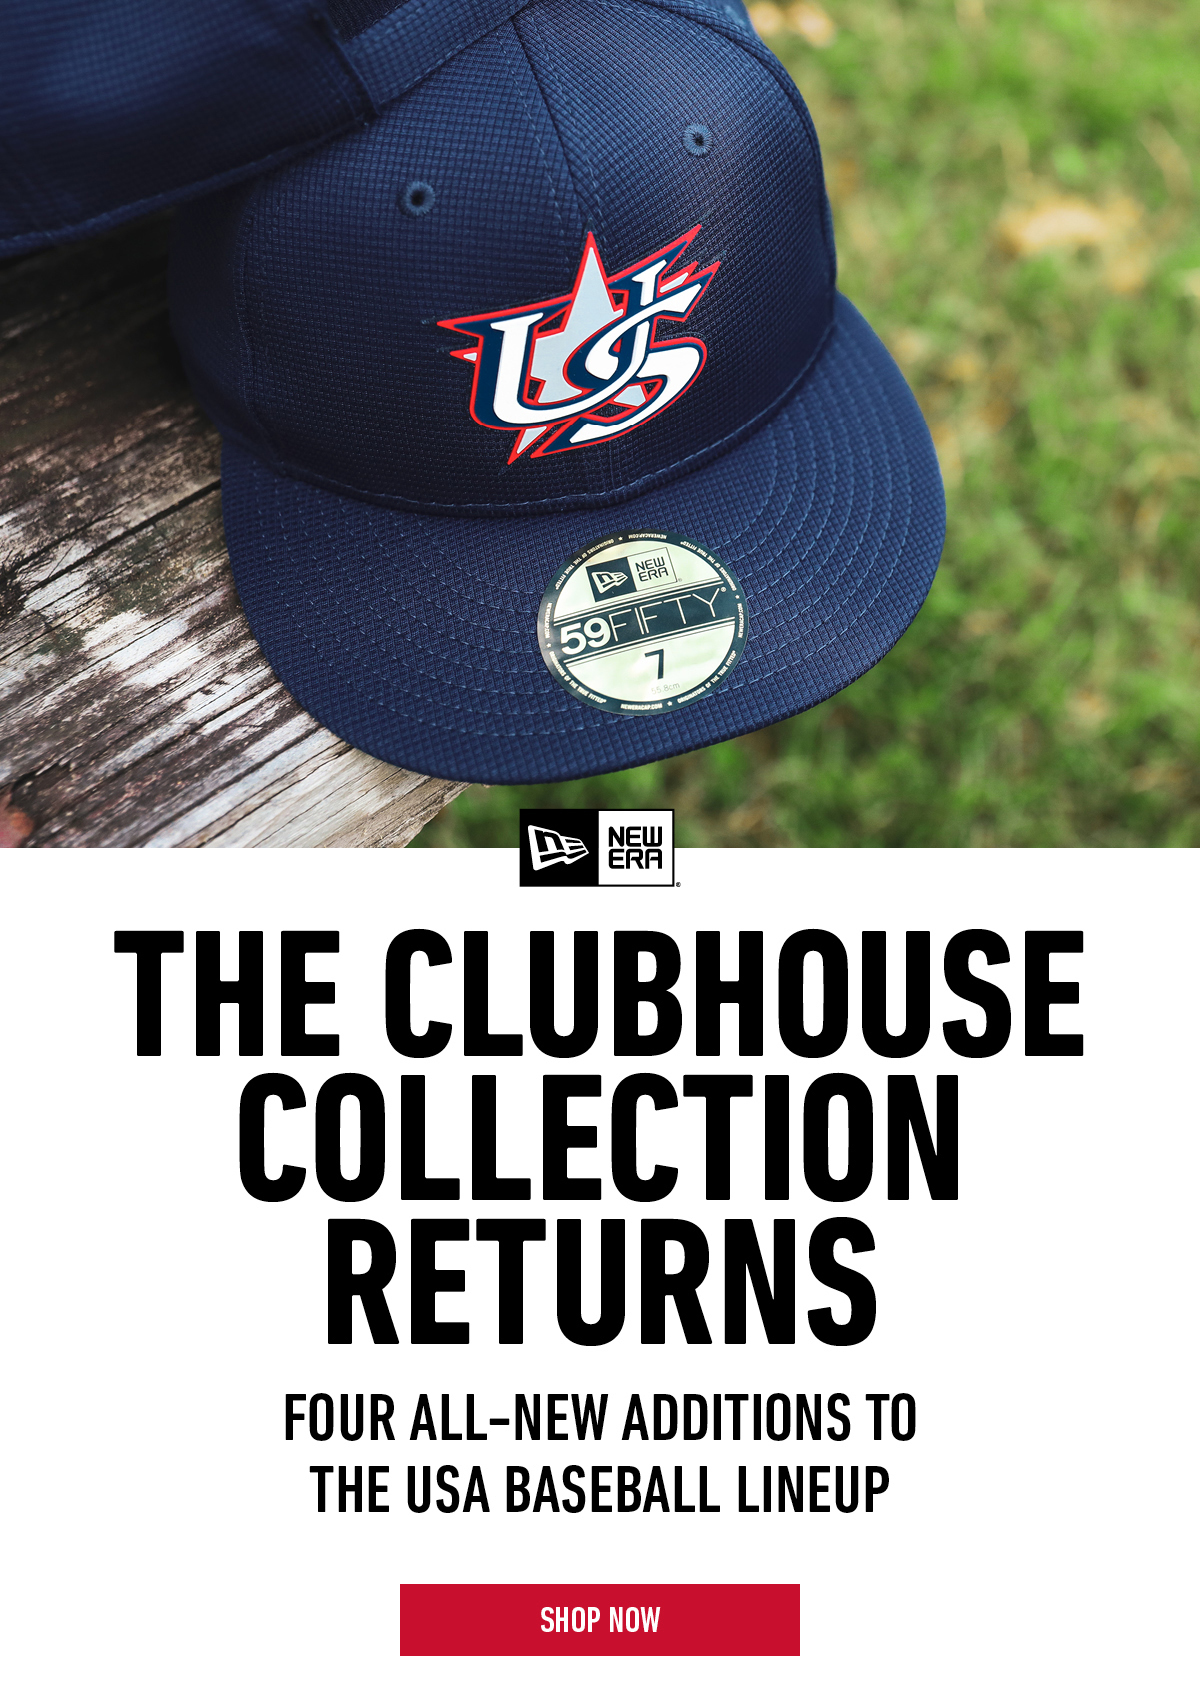 The Clubhouse Collection Returns